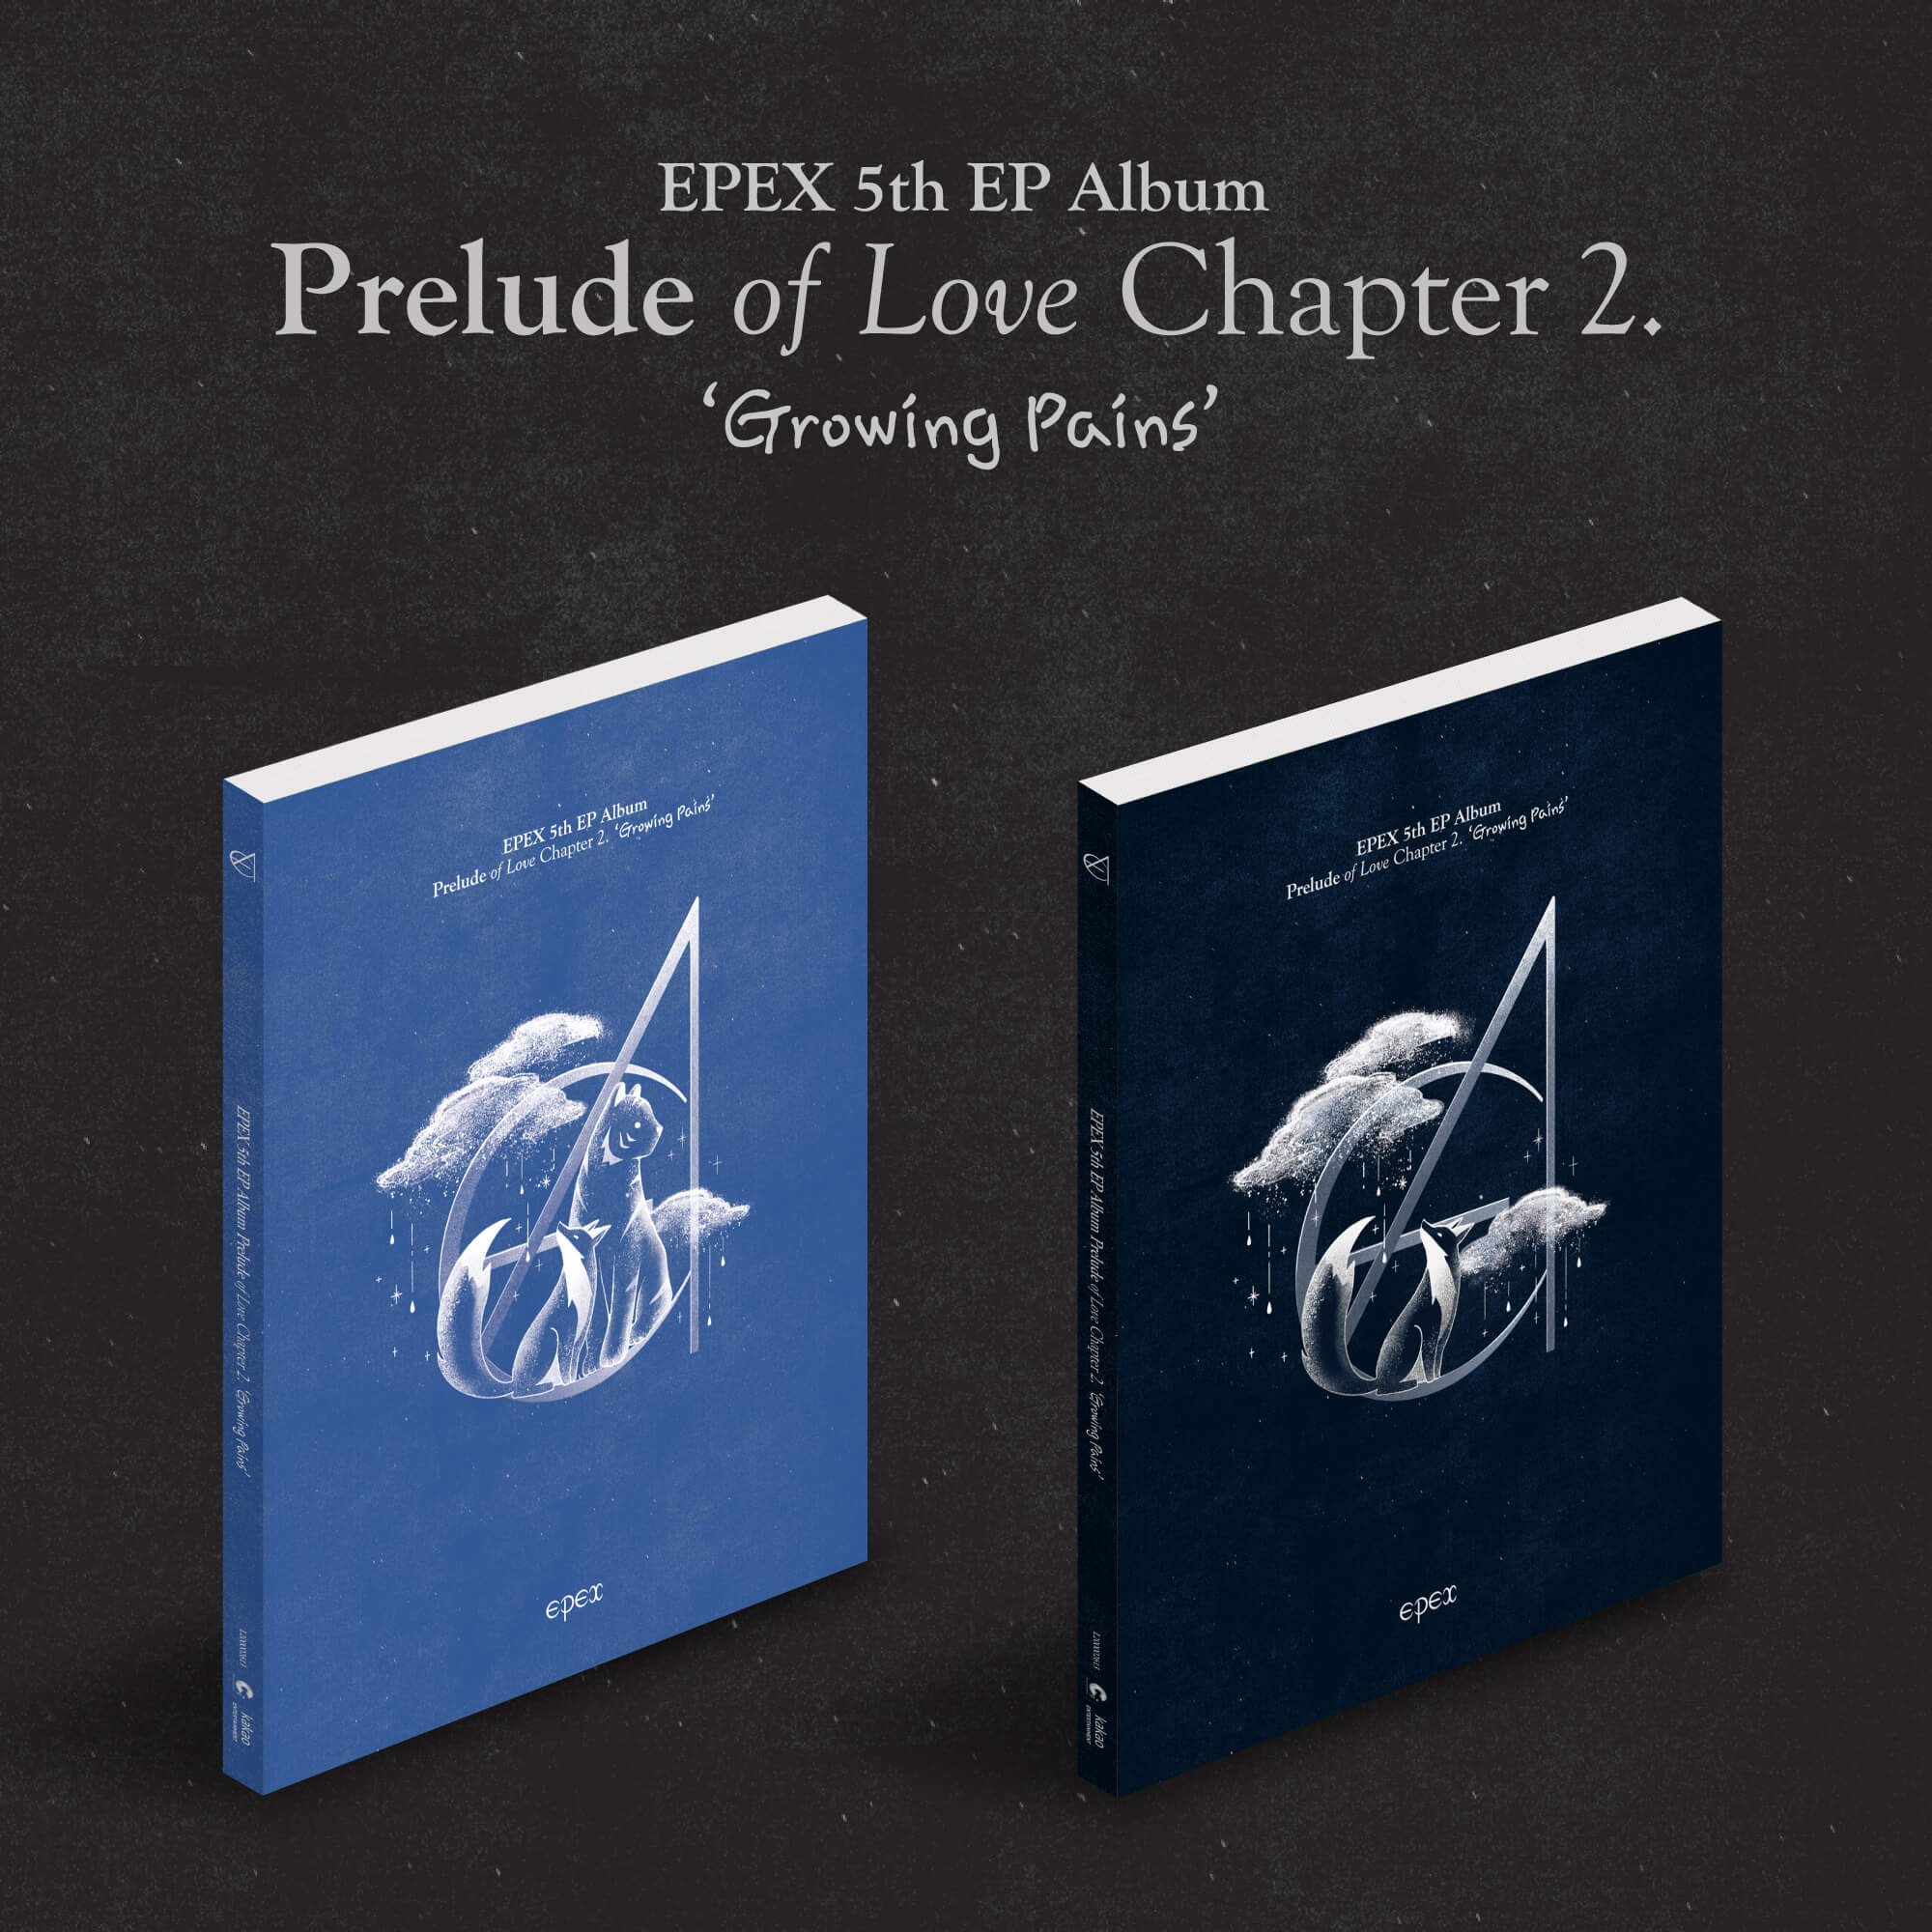 EPEX 5th Mini Album Prelude of Love Chapter 2. Growing Pains - CLOUD / FOX Version